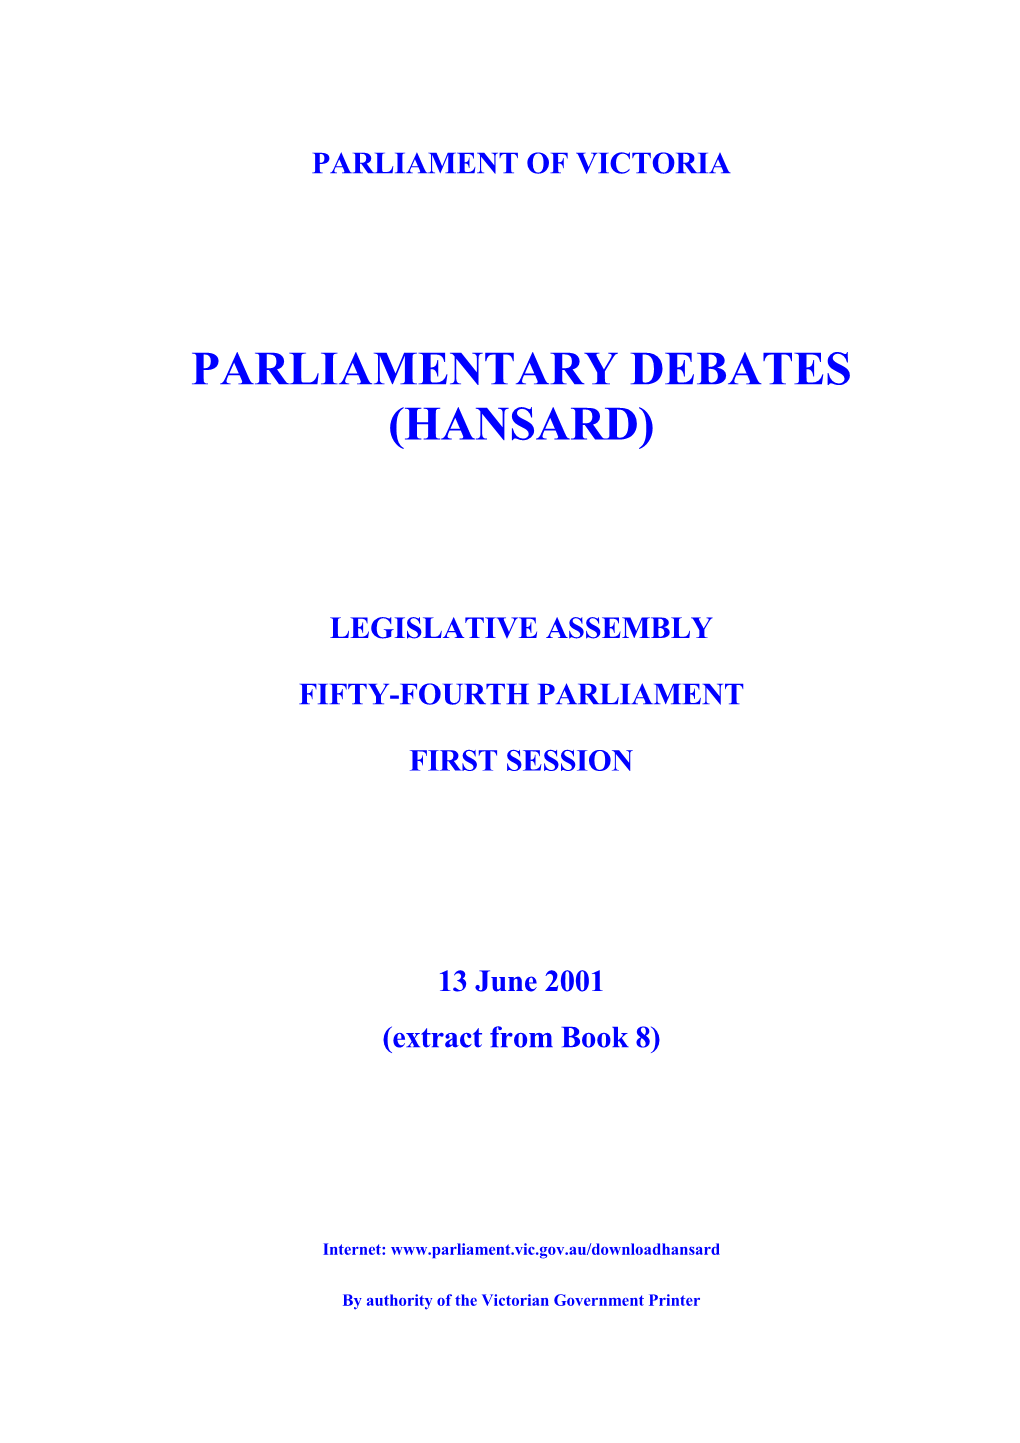 Assembly Parlynet Extract 13 June 2001 from Book 8